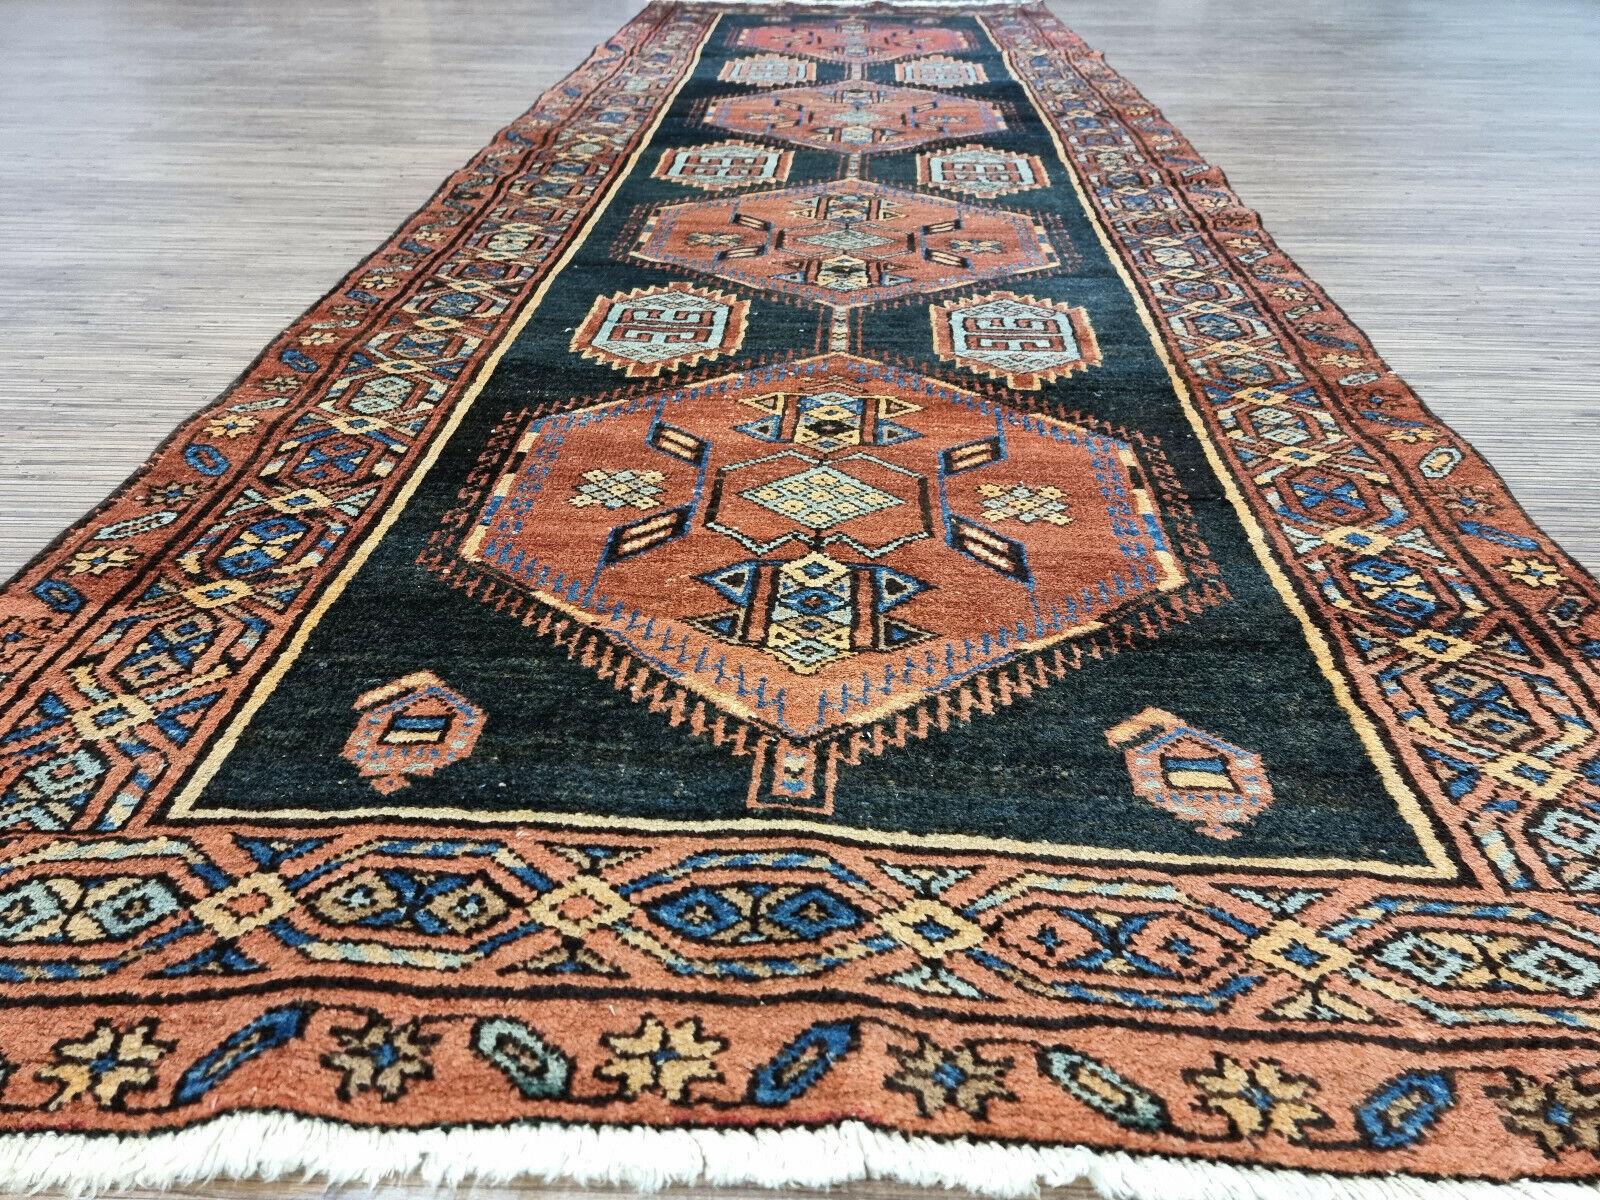 Hand-Knotted Handmade Antique Persian Style Hamadan Rug 3.2' x 9.1', 1920s - 1D105